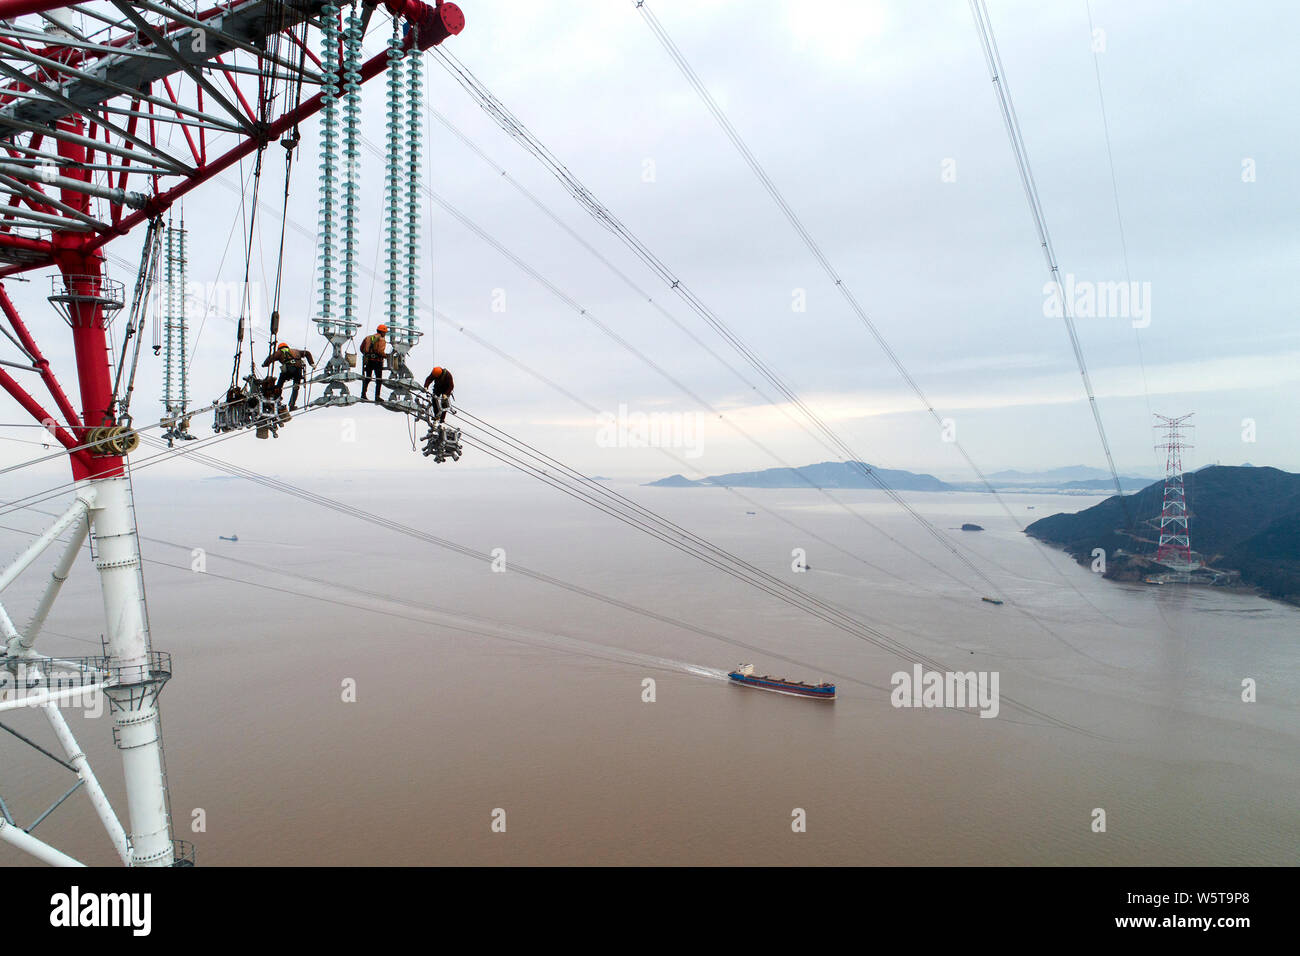 Chinese workers assemble power cables to connect Zhoushan's Jintang and  Cezi islands with a distance of 2,656 metres at the 380-metre tall  electricity Stock Photo - Alamy